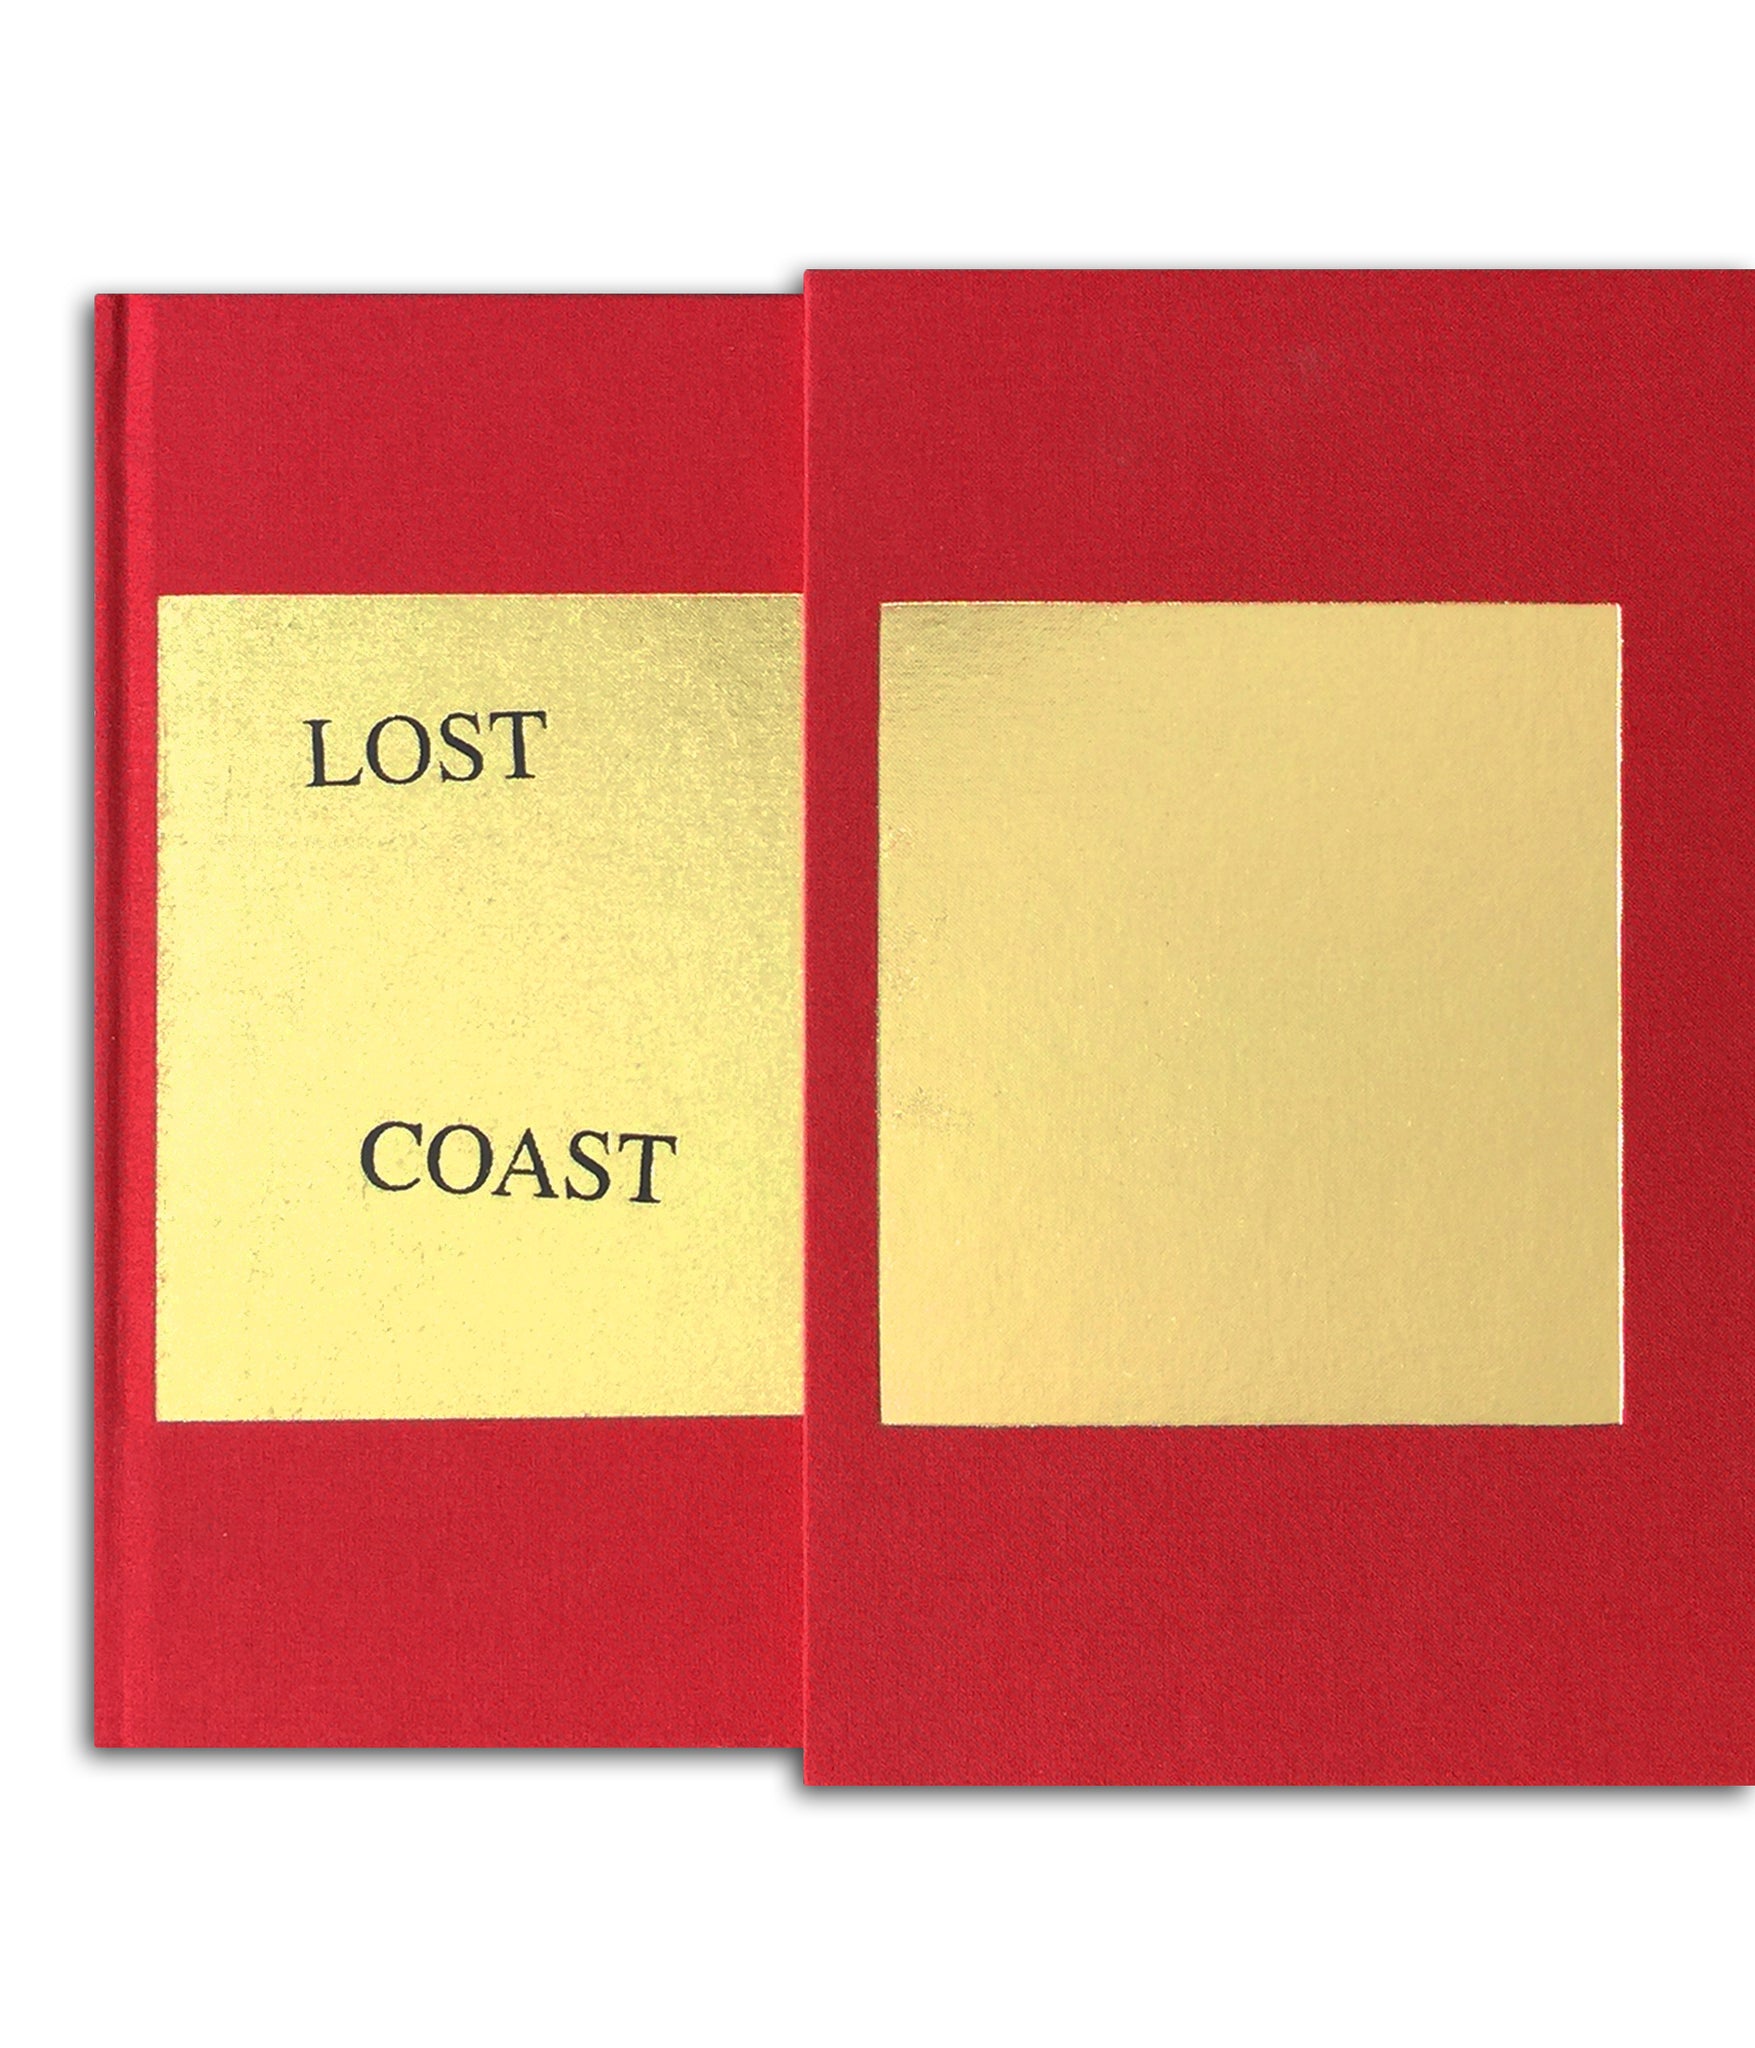 Lost Coast - Special Edition with Prints